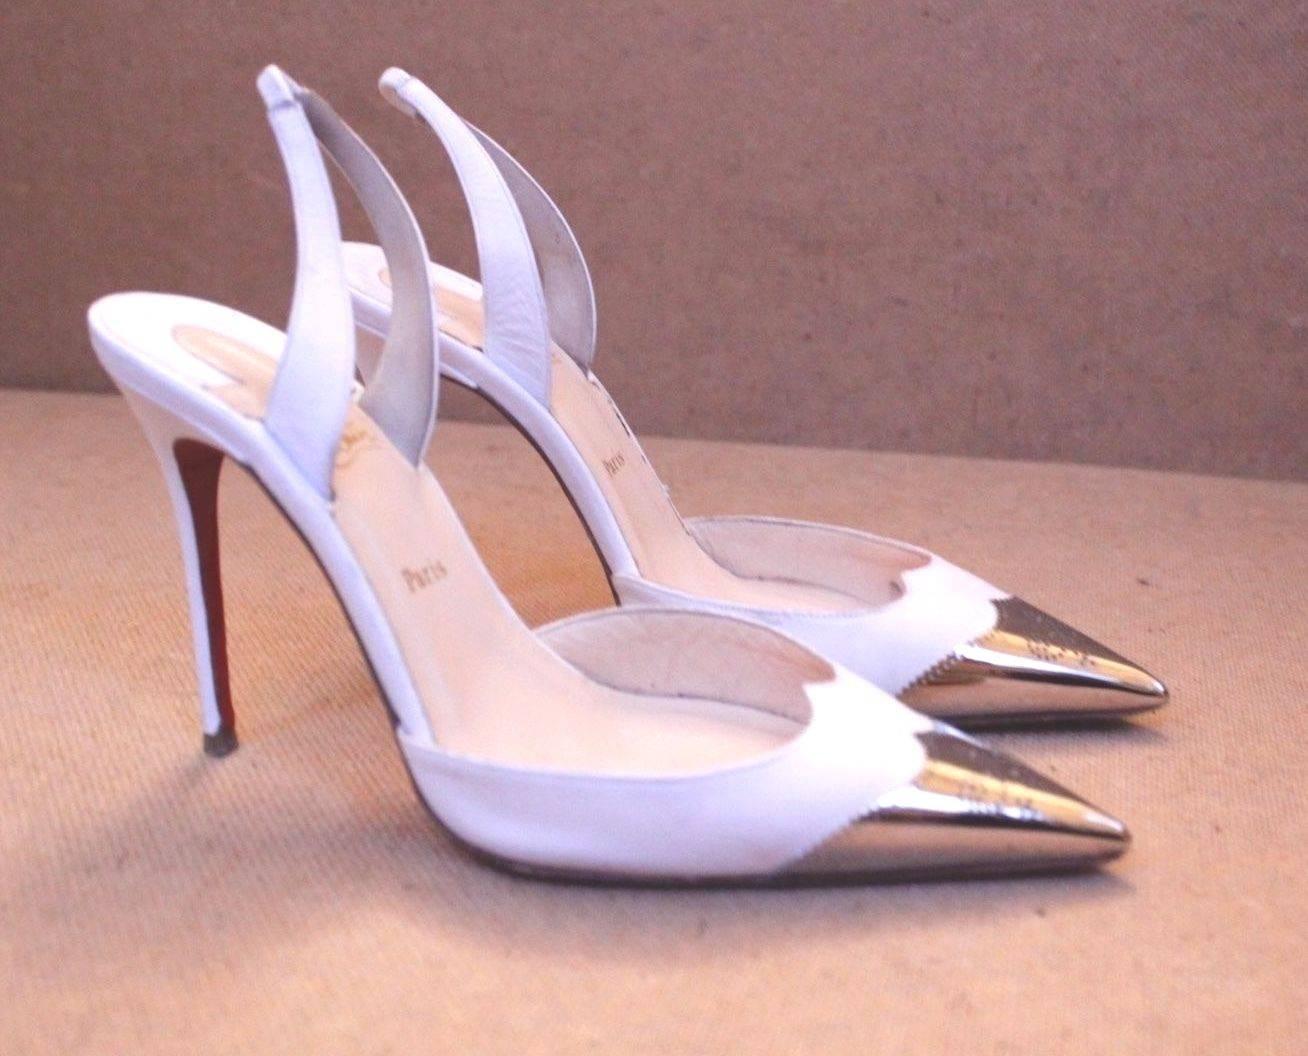 CHRISTIAN LOUBOUTIN White Silver Calamijane Metal Cap Toe 36.5
Beautiful white heels from Christian Louboutin featuring a silver capped toe 
Slim heel and sling back style 
Used a few times some signs of wear to the heel base and tip 
The tip is